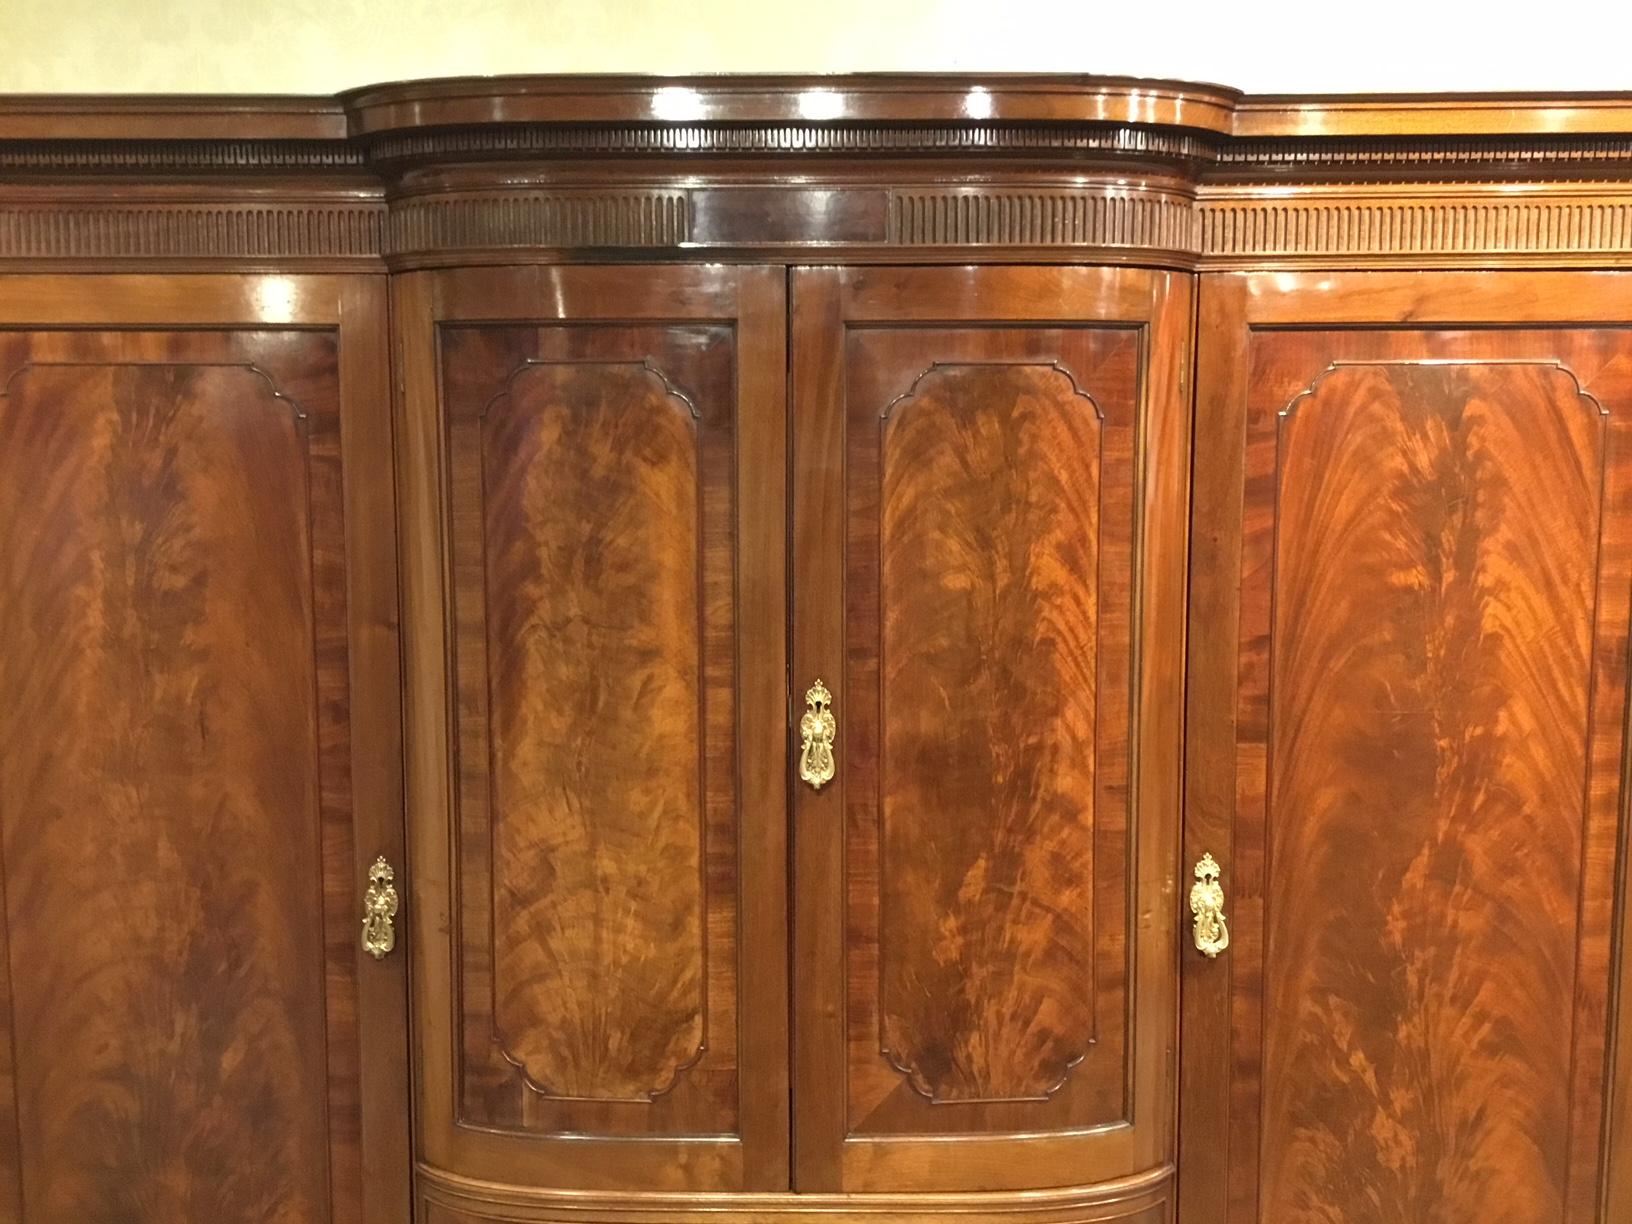 A mahogany Edwardian period breakfront wardrobe by Howard & Sons of London. The cornice having dentil moulding and an arcaded frieze above an arrangement of four panelled doors and six rectangular drawers veneered in mahogany with oak and cedar